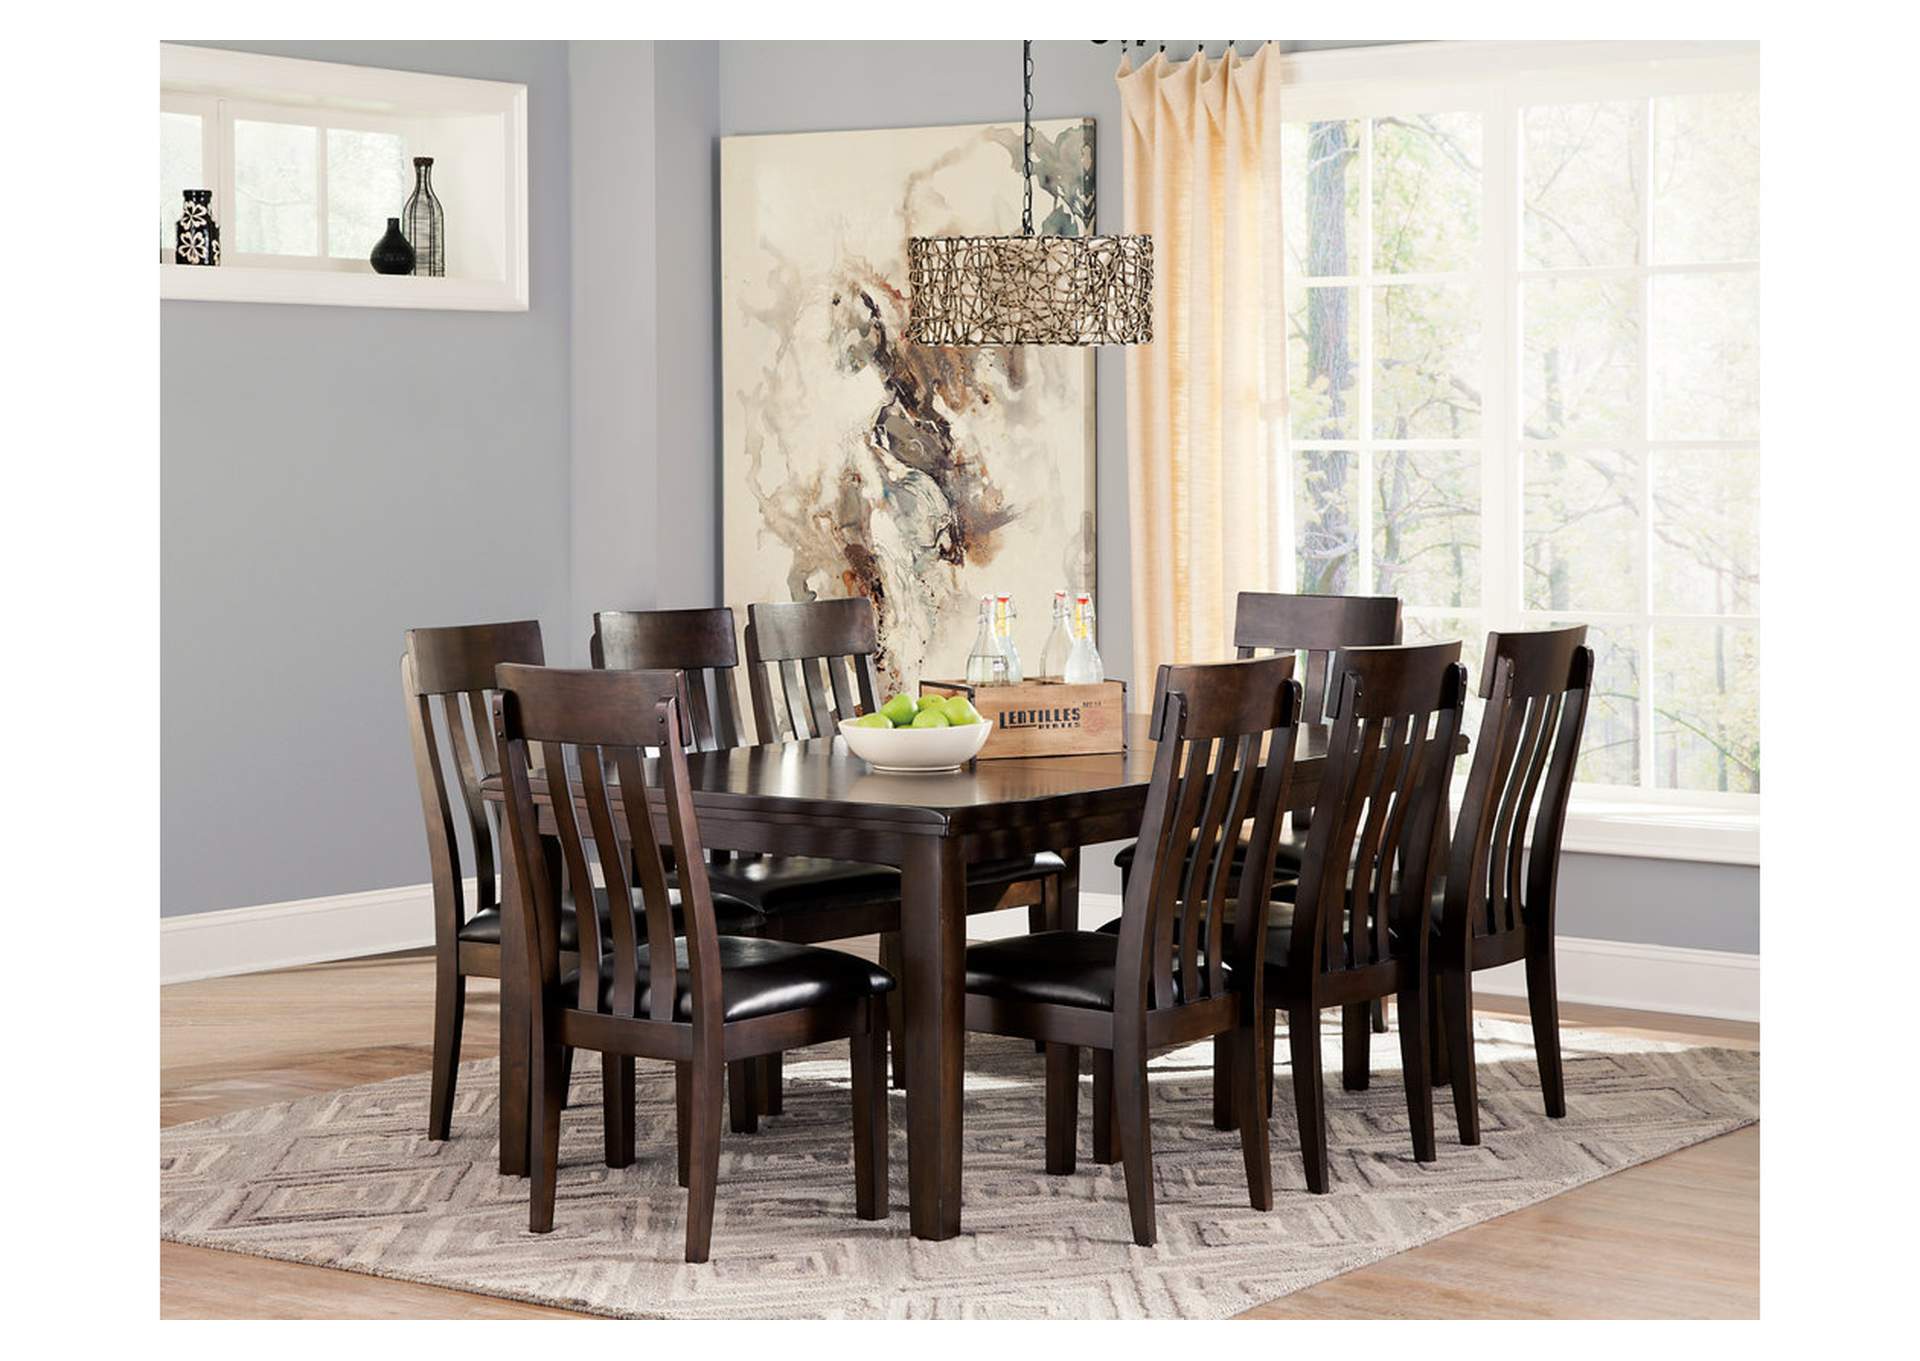 Haddigan Dining Table and 8 Chairs,Signature Design By Ashley